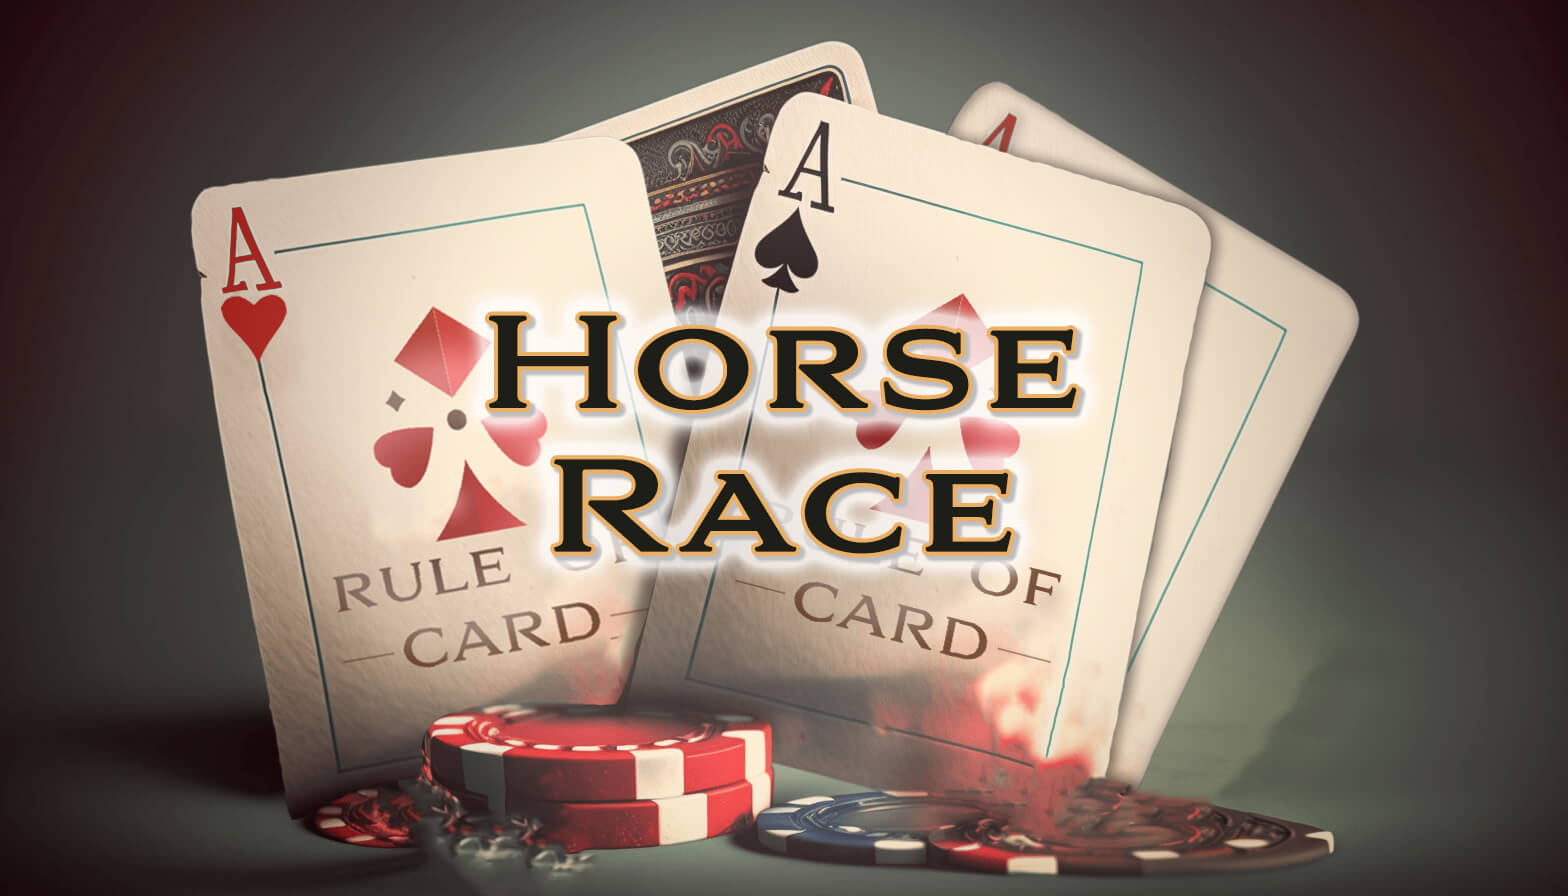 Playing the card game Horse Race